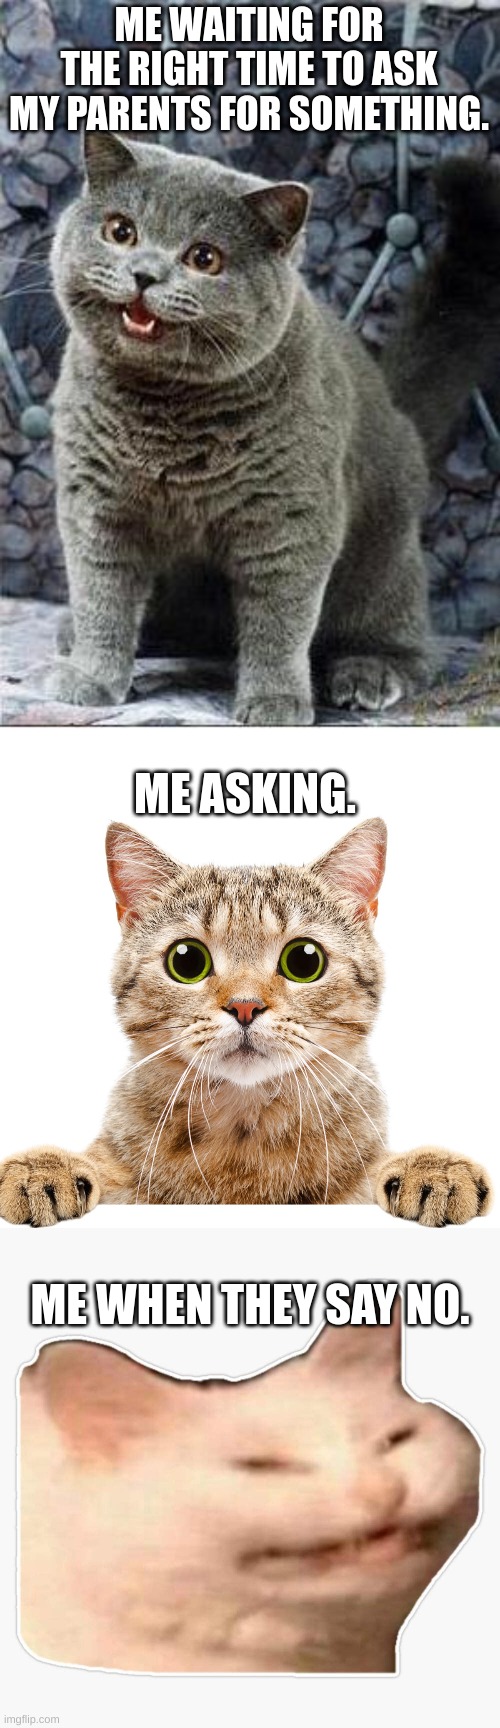 ME WAITING FOR THE RIGHT TIME TO ASK MY PARENTS FOR SOMETHING. ME ASKING. ME WHEN THEY SAY NO. | image tagged in i can has cheezburger cat,mad cat,cats | made w/ Imgflip meme maker